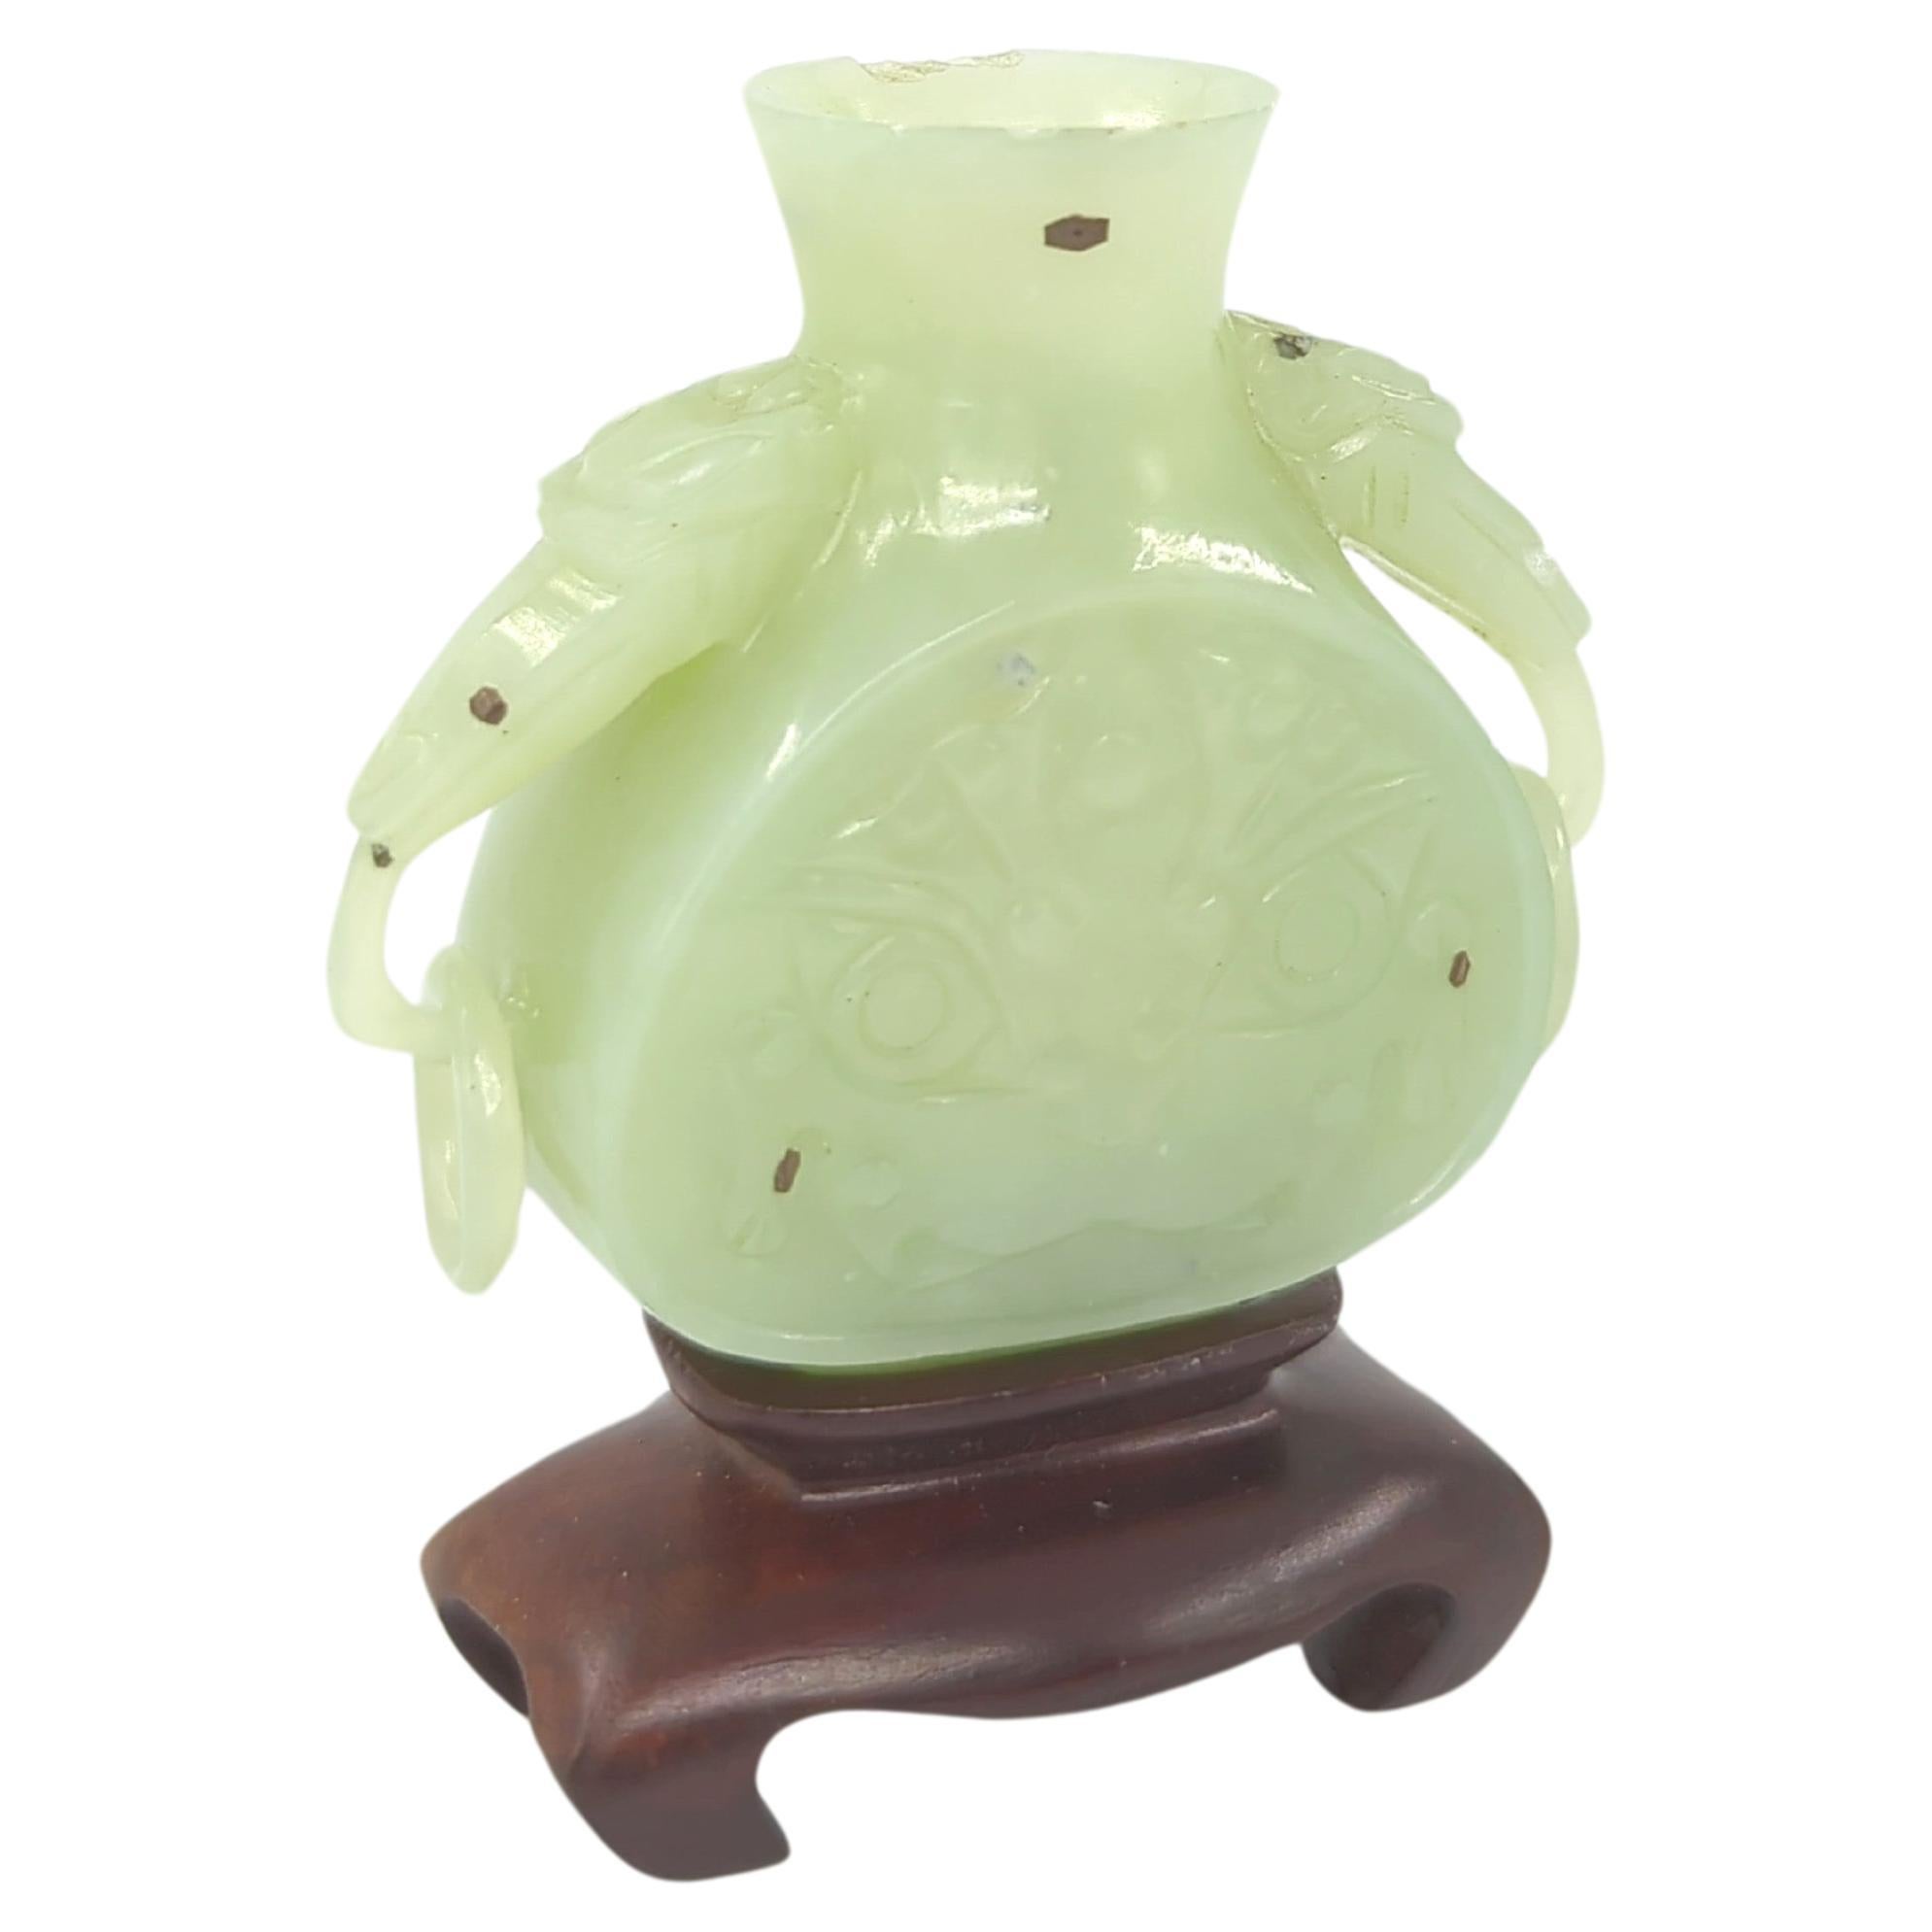 This exquisite 19th-century Qing Dynasty celadon jade miniature vase is a masterwork of Chinese craftsmanship. The vase features intricately carved beast handles, each adorned with free-moving rings, adding a layer of complexity and artistry to the